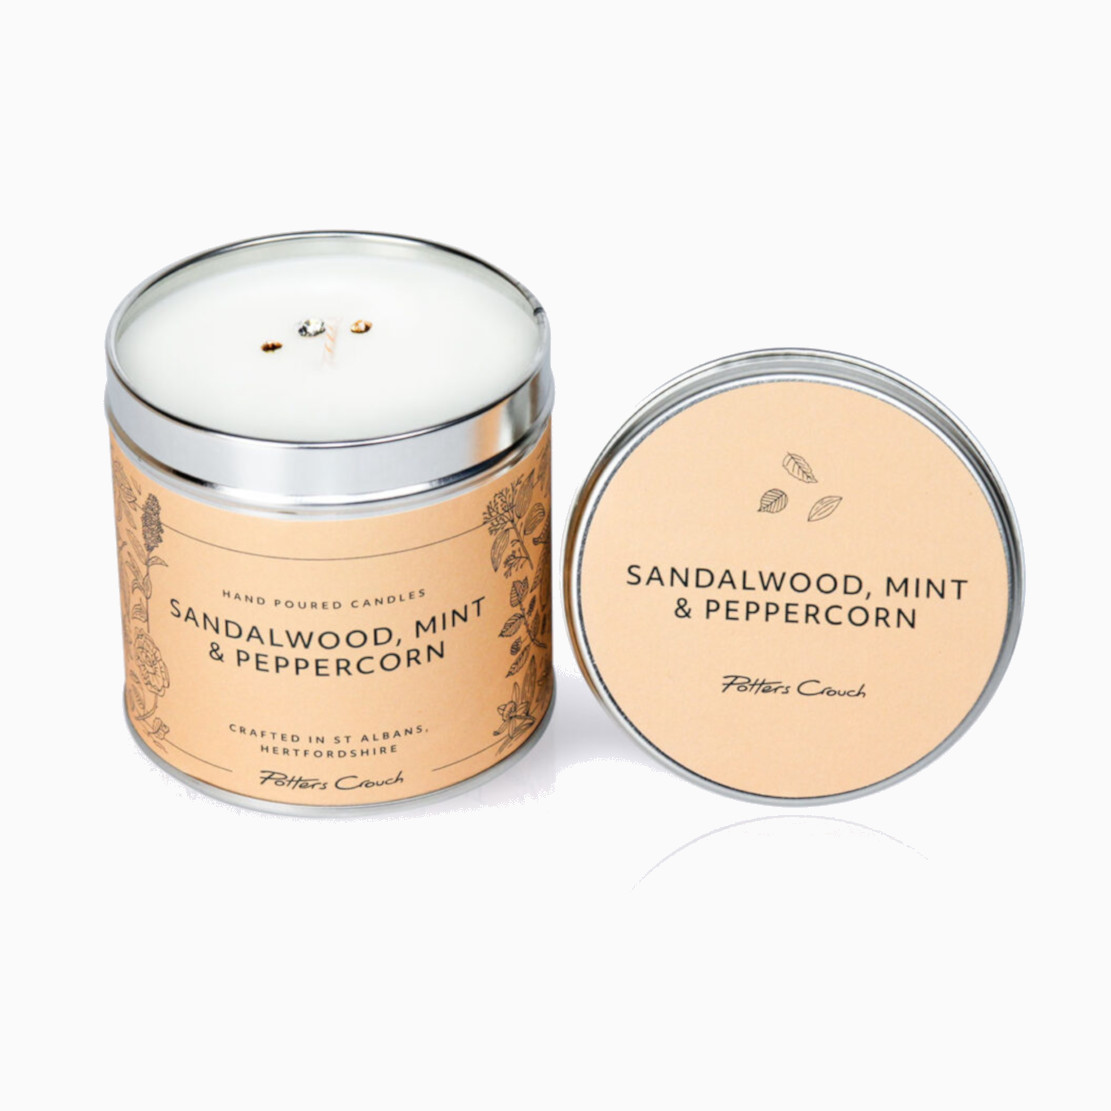 Potters Crouch Sandalwood Mint & Peppercorn Wellness Candle